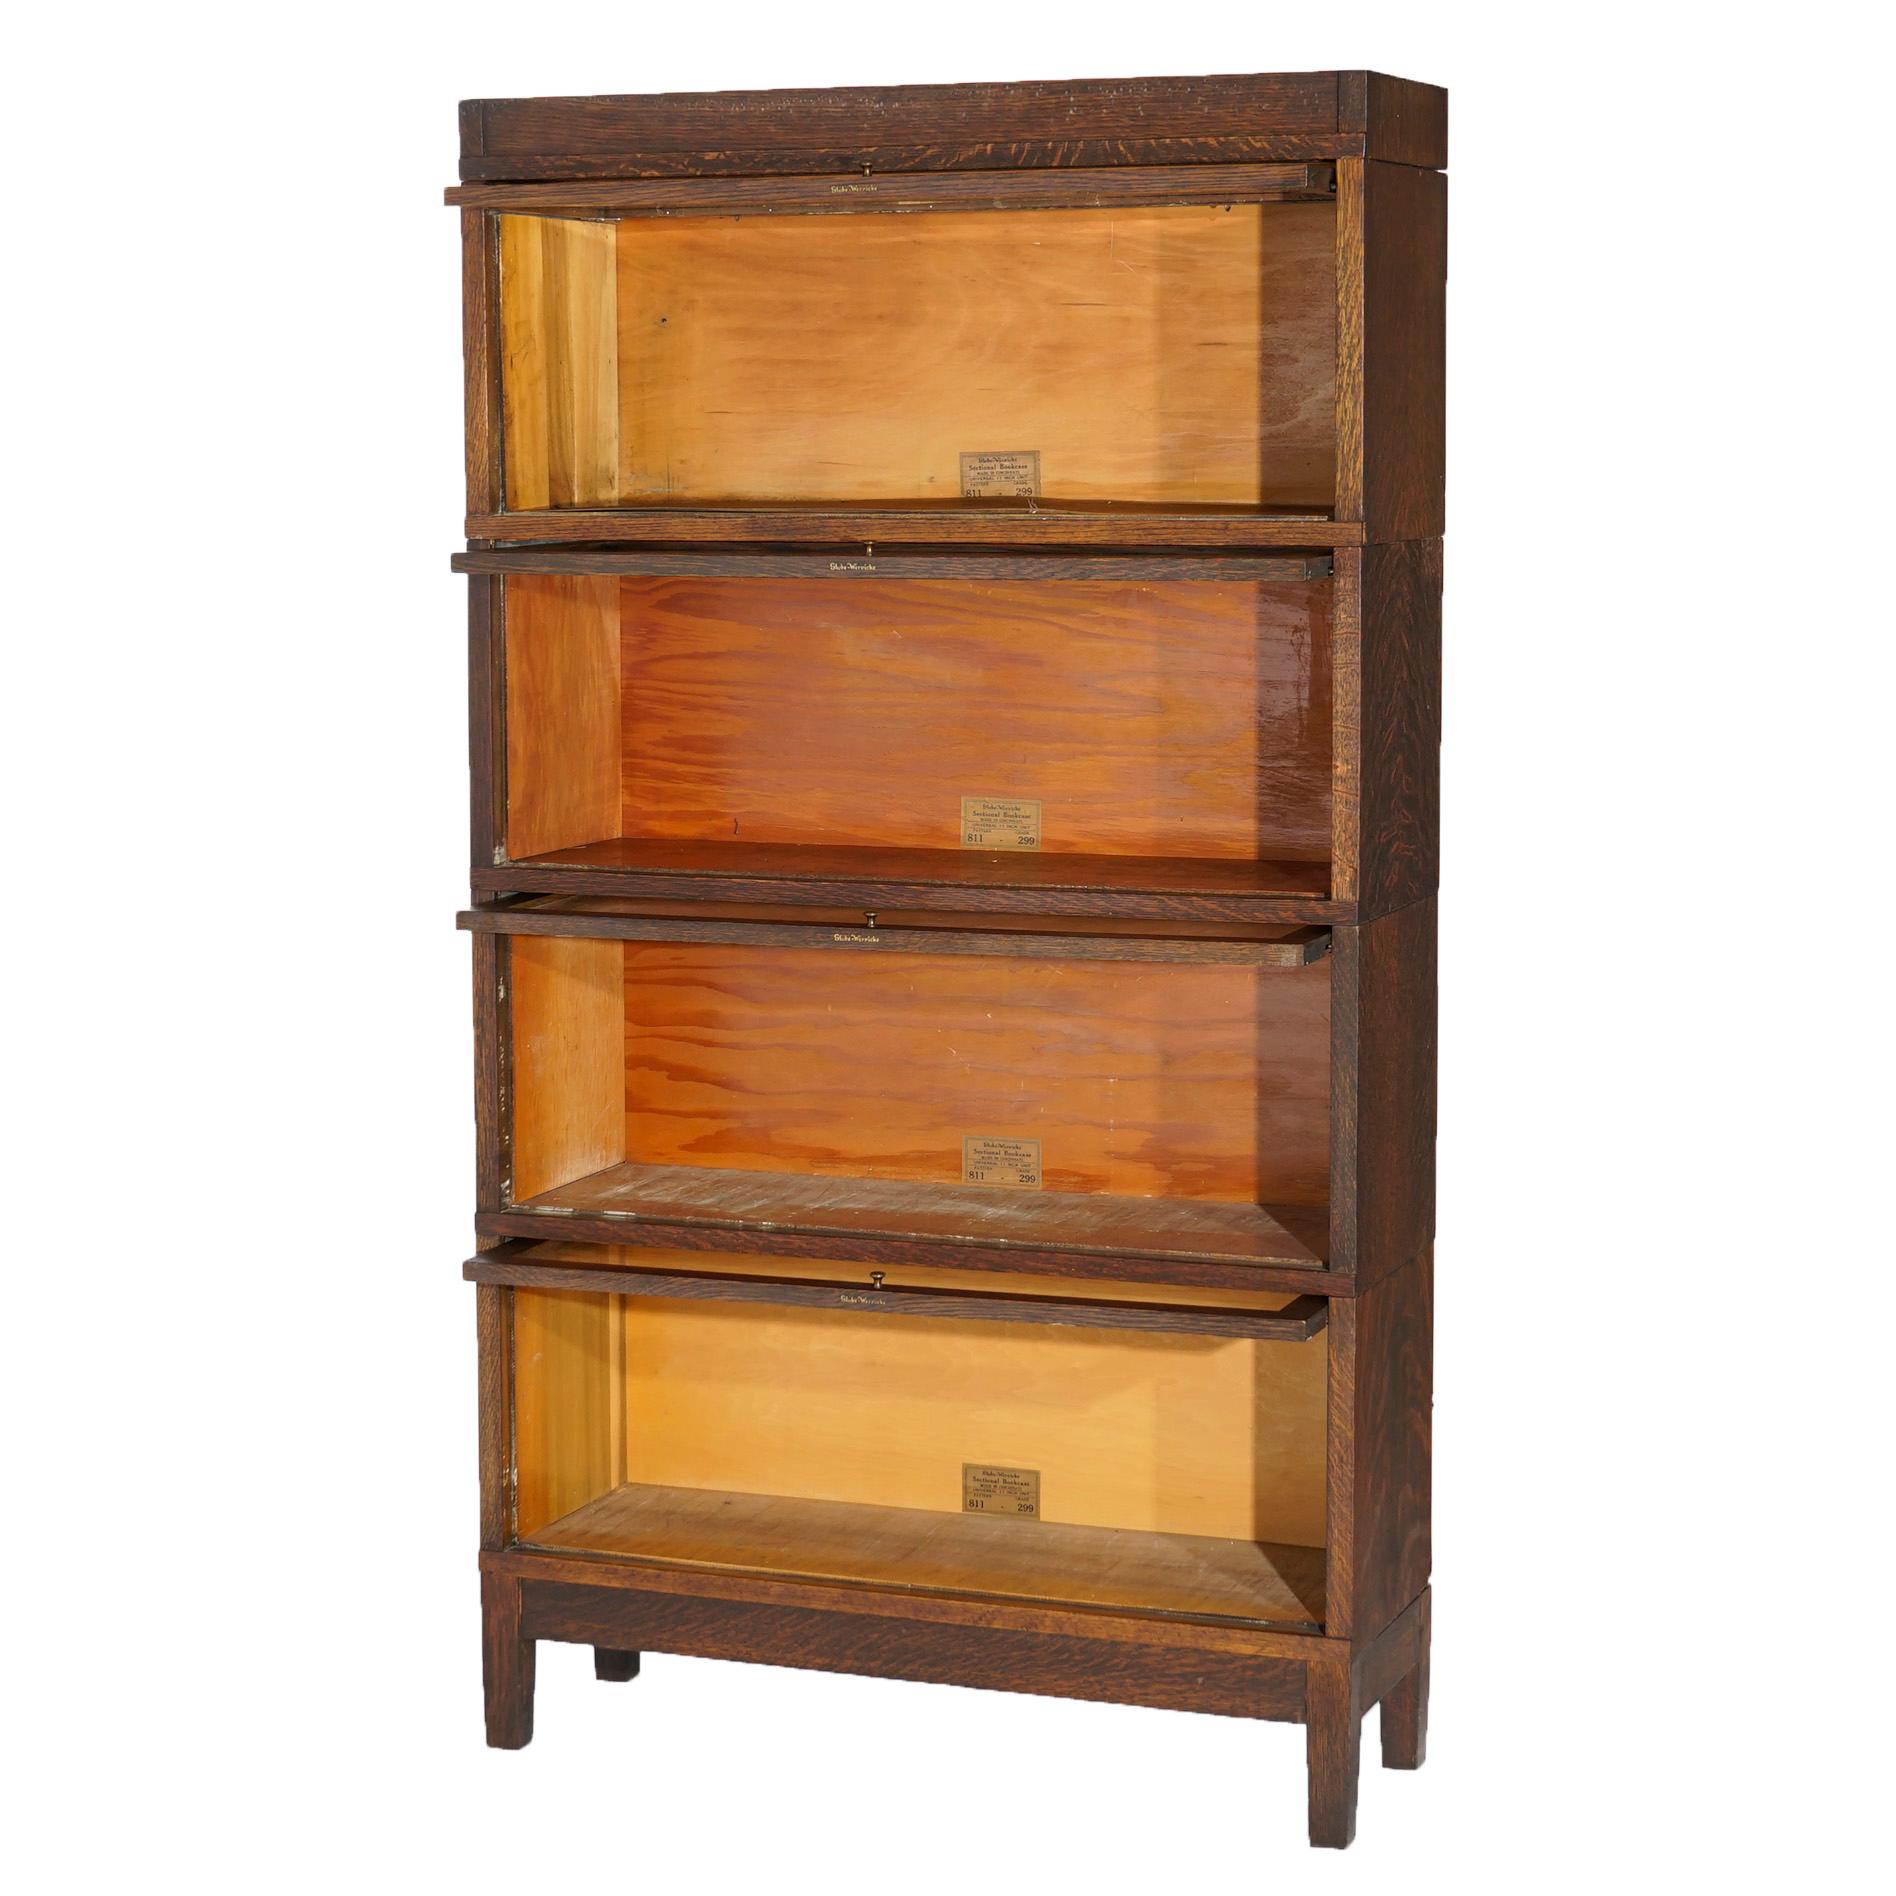 An antique Arts and Crafts barrister bookcase by Globe Wernicke offers quarter sawn oak construction with four stacks, each having pull-out glass doors, and raised on square and straight legs, maker label as photographed, c1910.

Measures- 62.75'' H